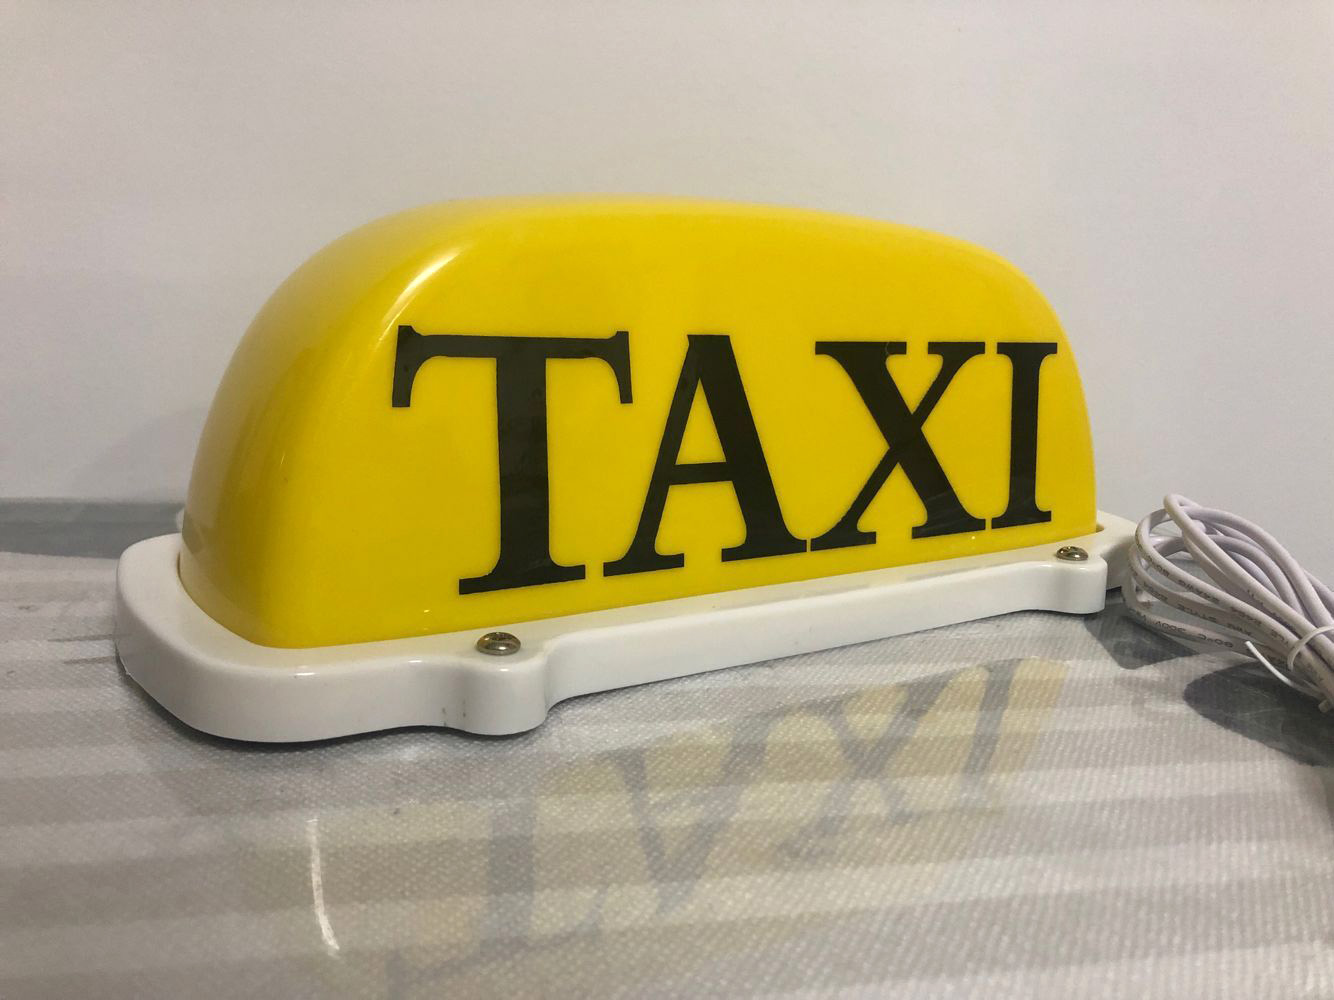 USB 5V TAXI Sign Badges Cab Roof Top Topper Car Magnetic Lamp LED Light Waterproof for drivers